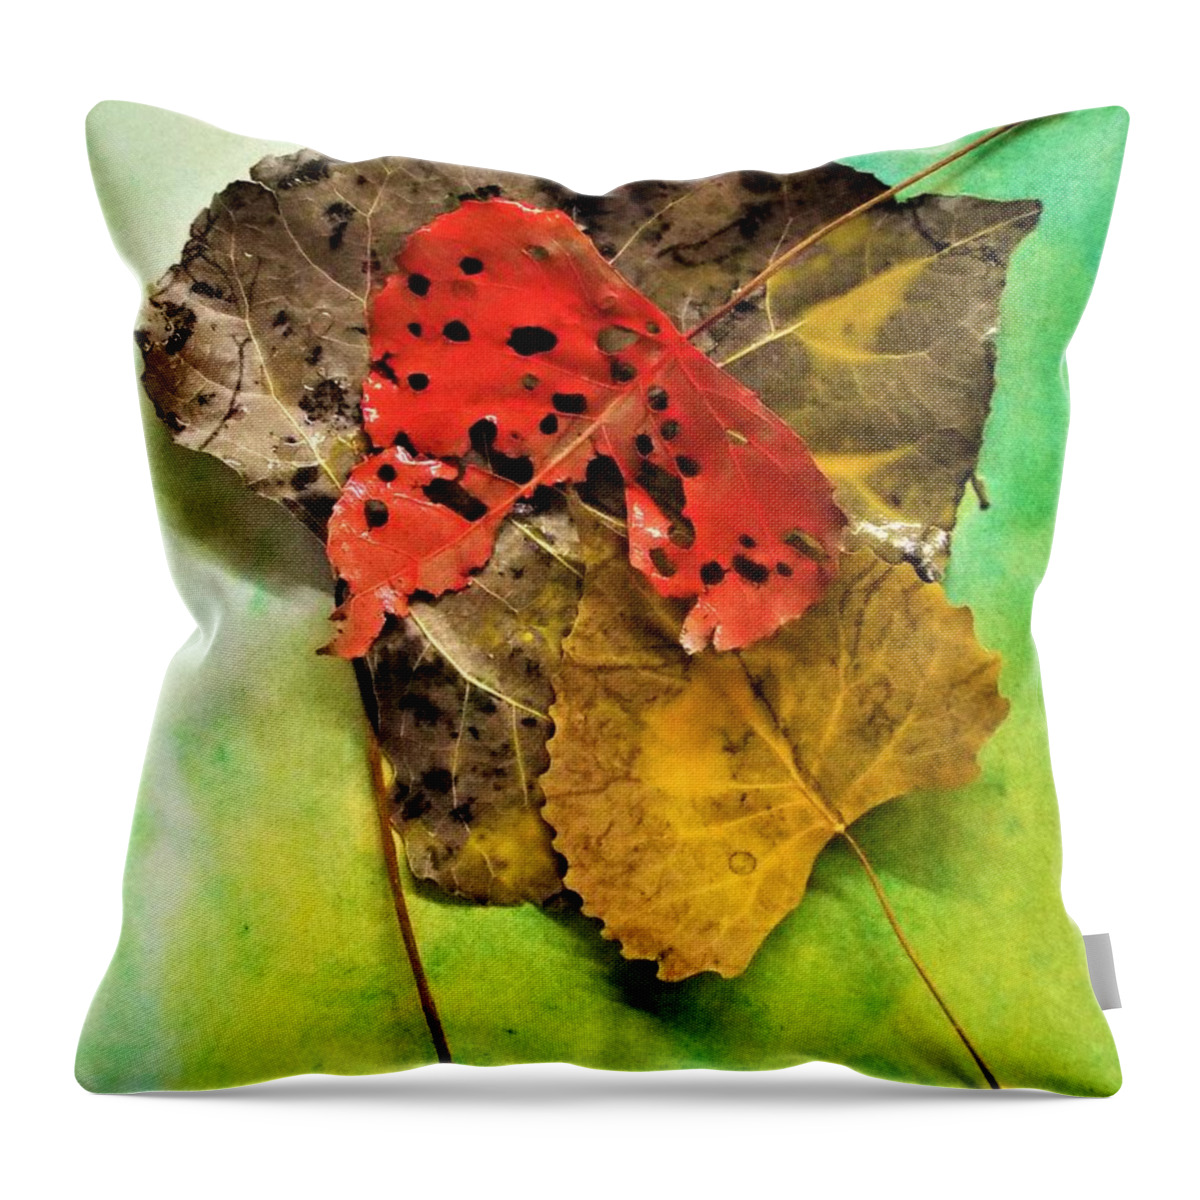 Fall Colors Throw Pillow featuring the photograph Ready For The Pile by Michael Dillon